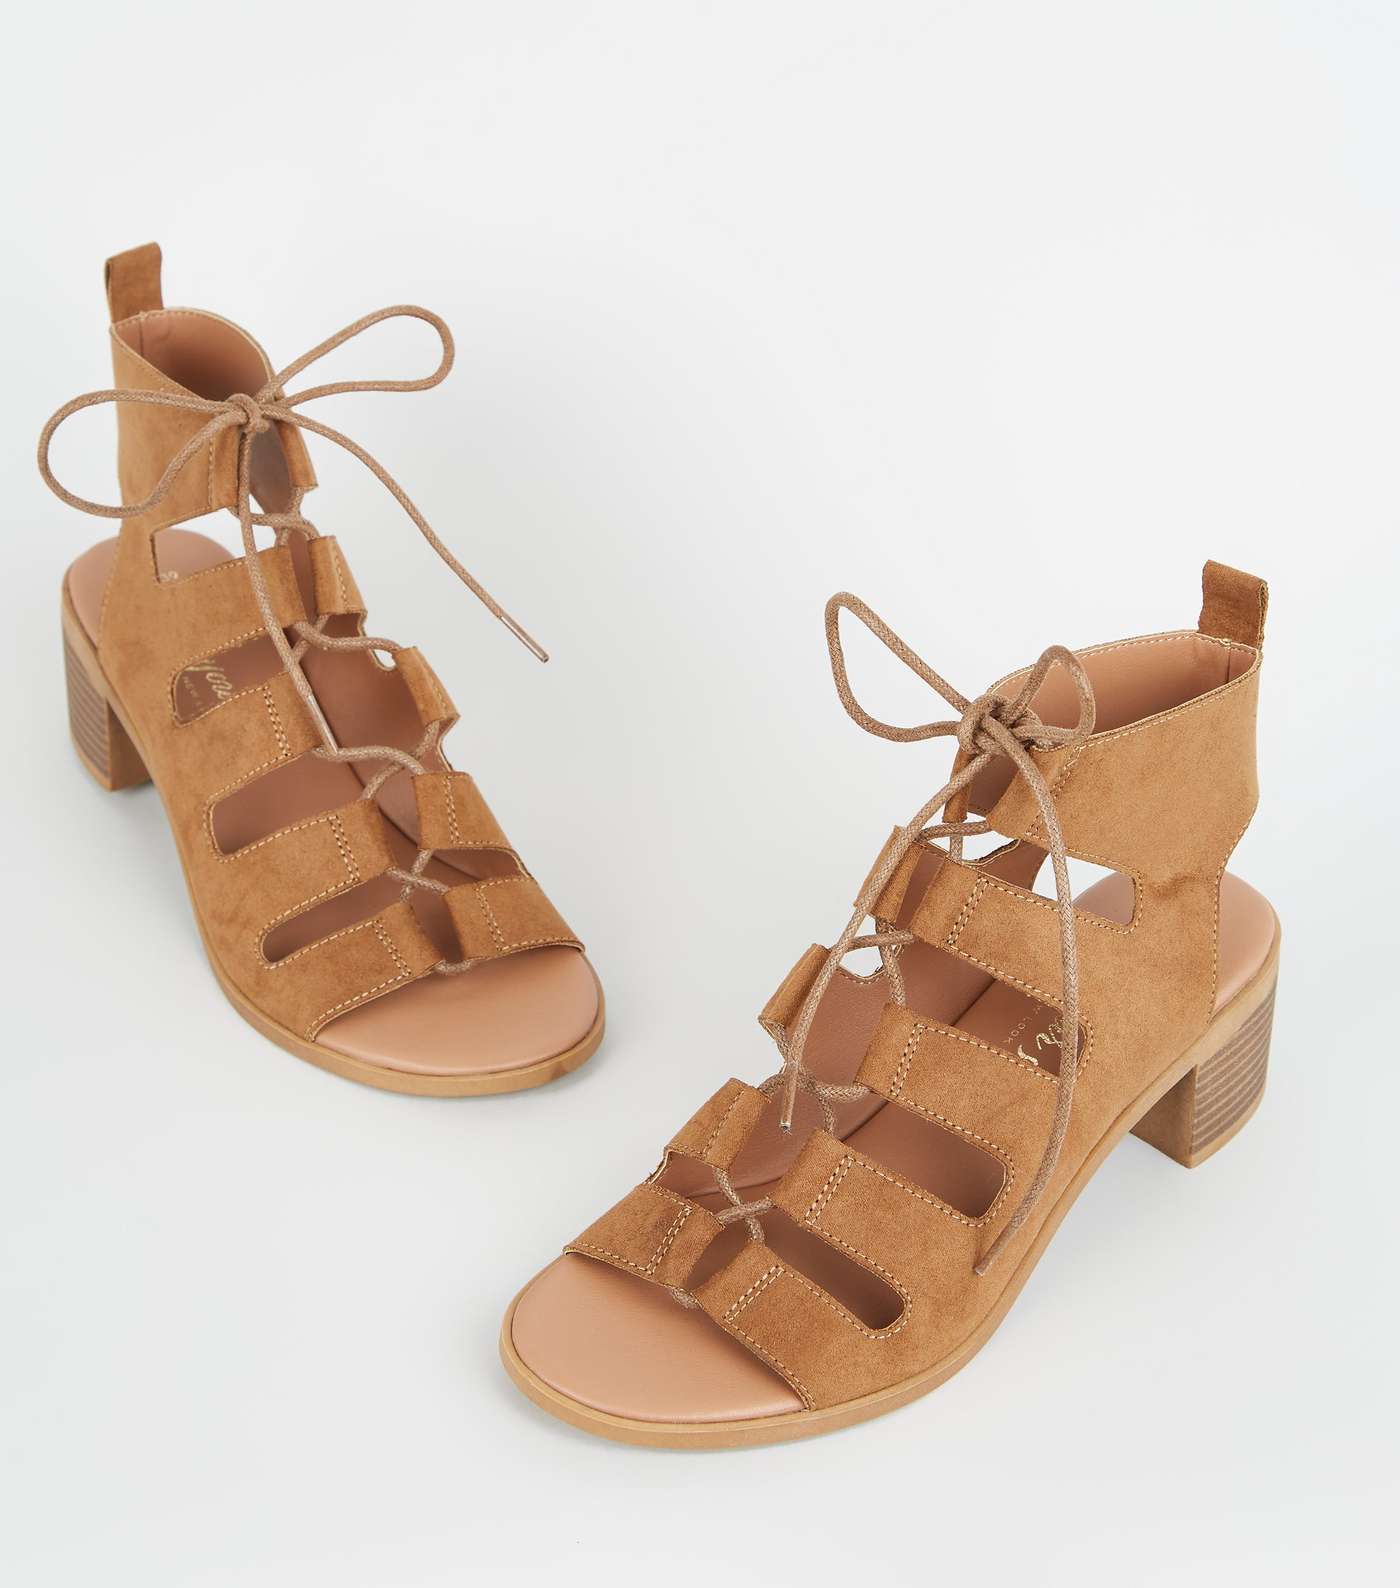 Tan Ghillie Lace Up Low Heel Sandals Image 3